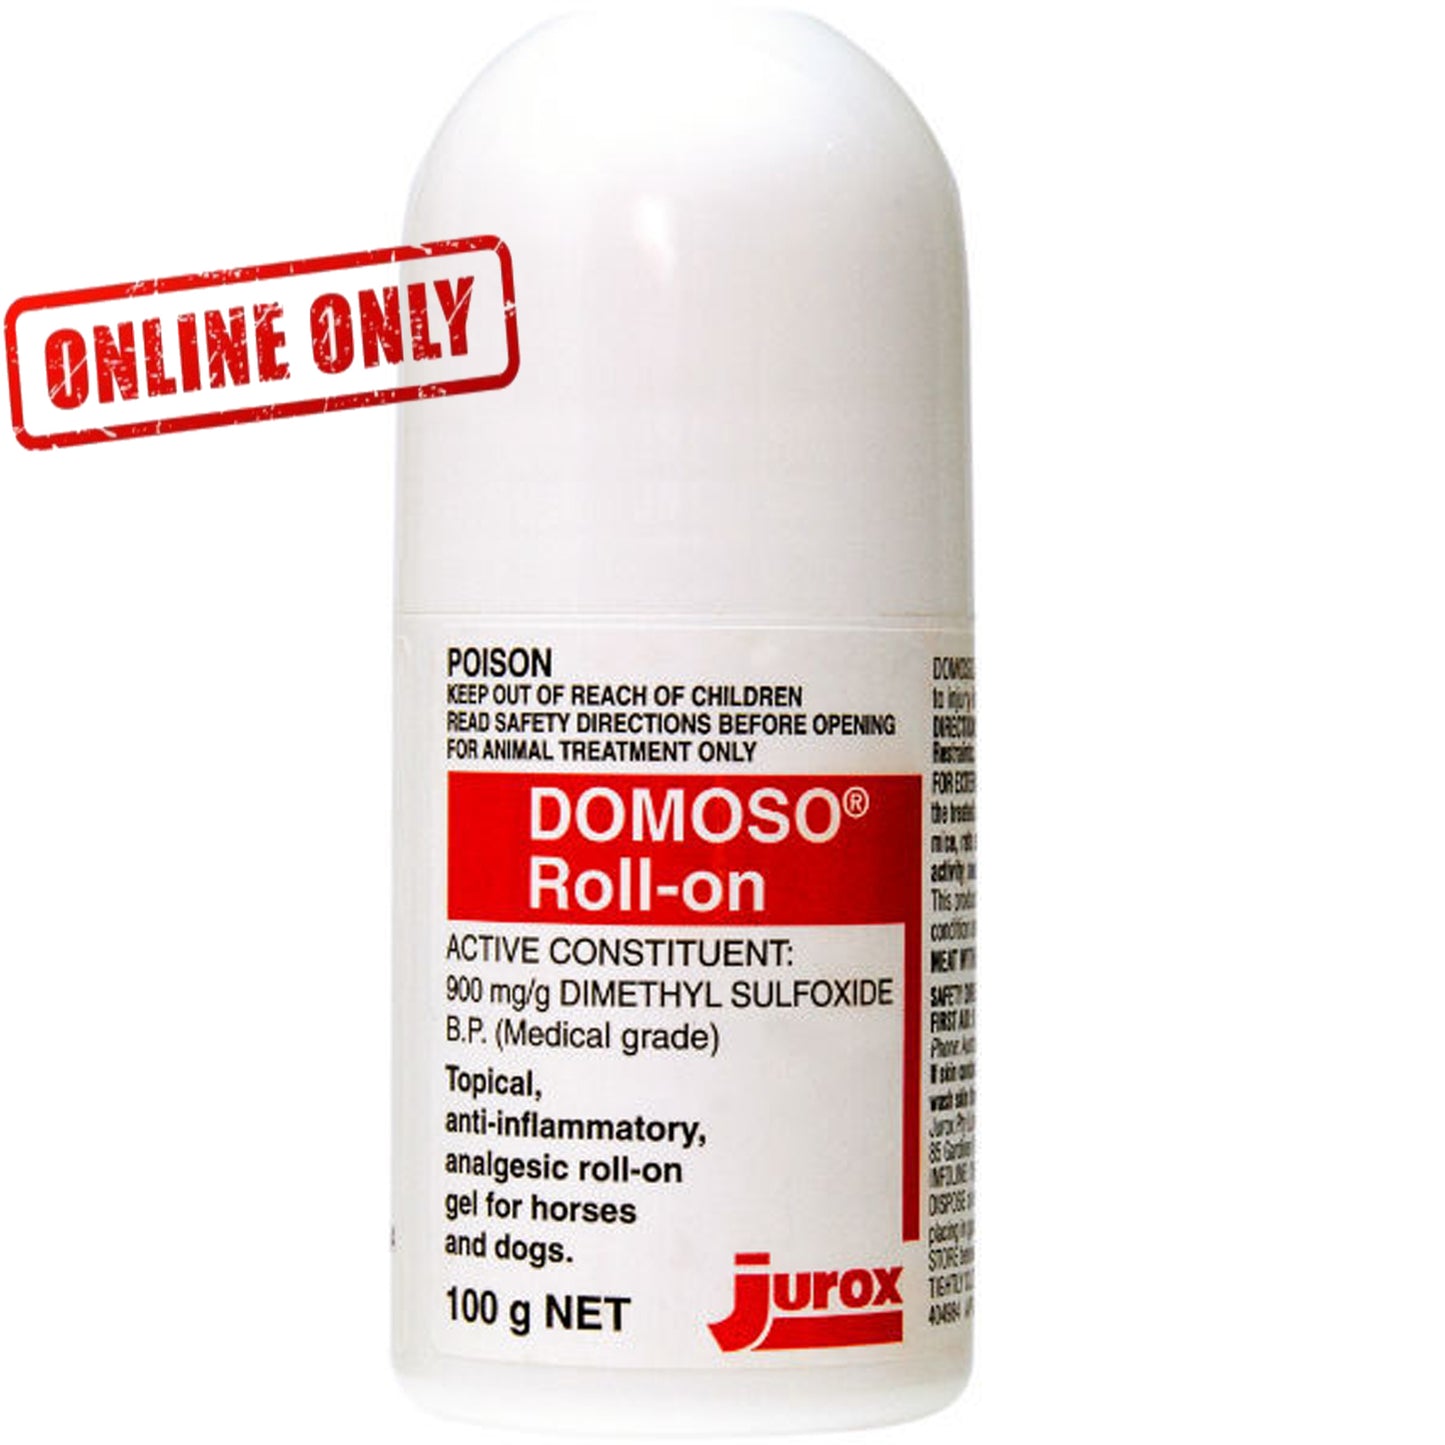 Domoso Roll On 100g Anti-inflammatory Analgesic Roll-on Gel For Horses & Dogs